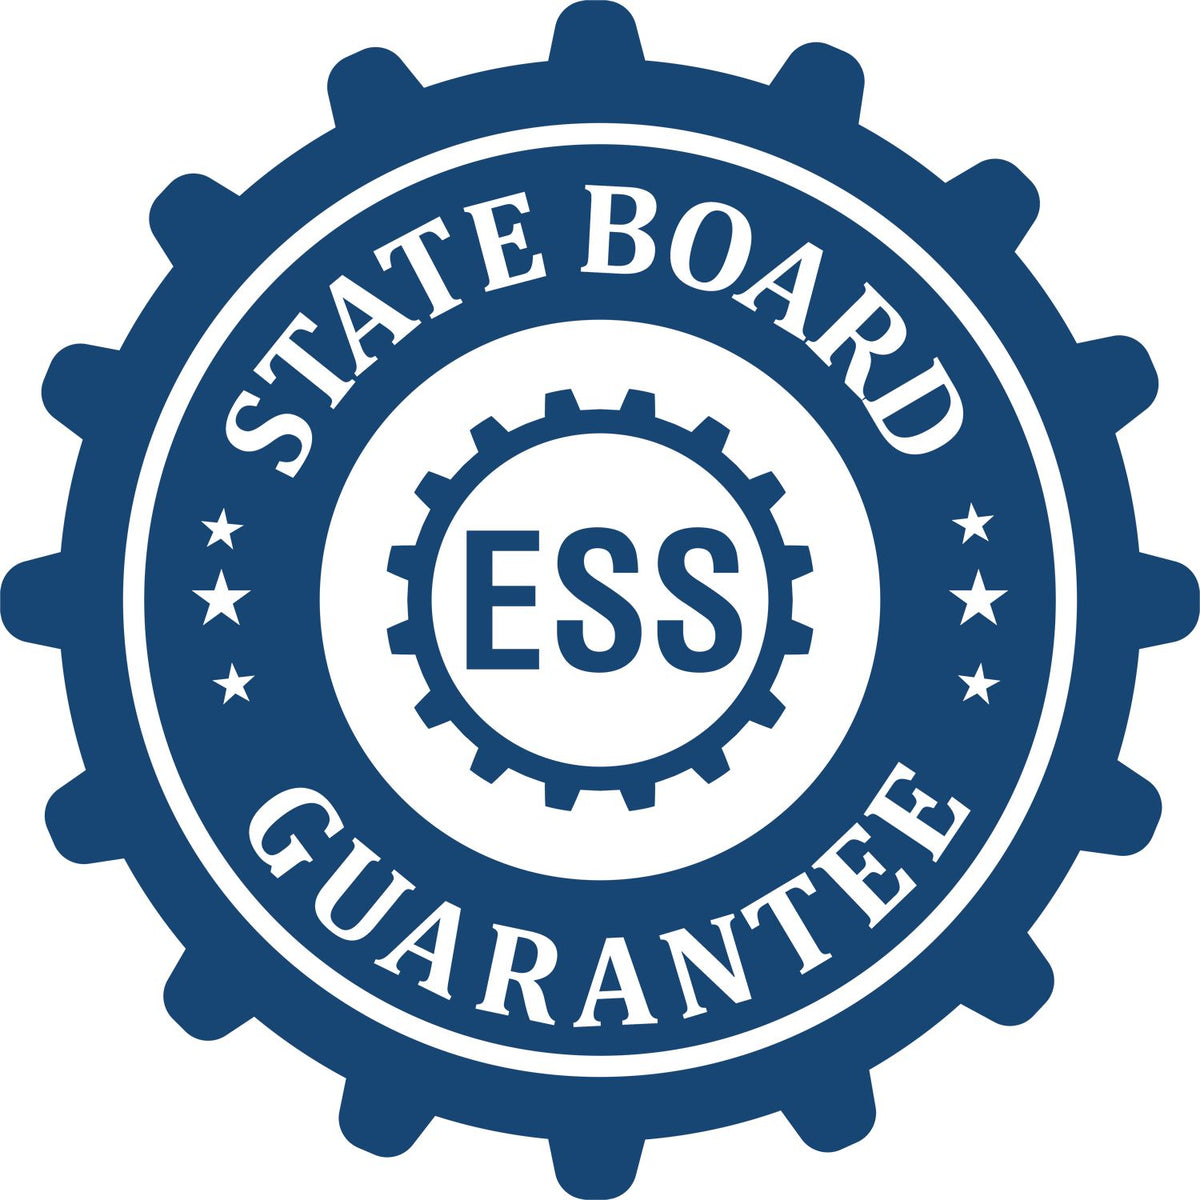 An emblem in a gear shape illustrating a state board guarantee for the Long Reach Connecticut Land Surveyor Seal product.